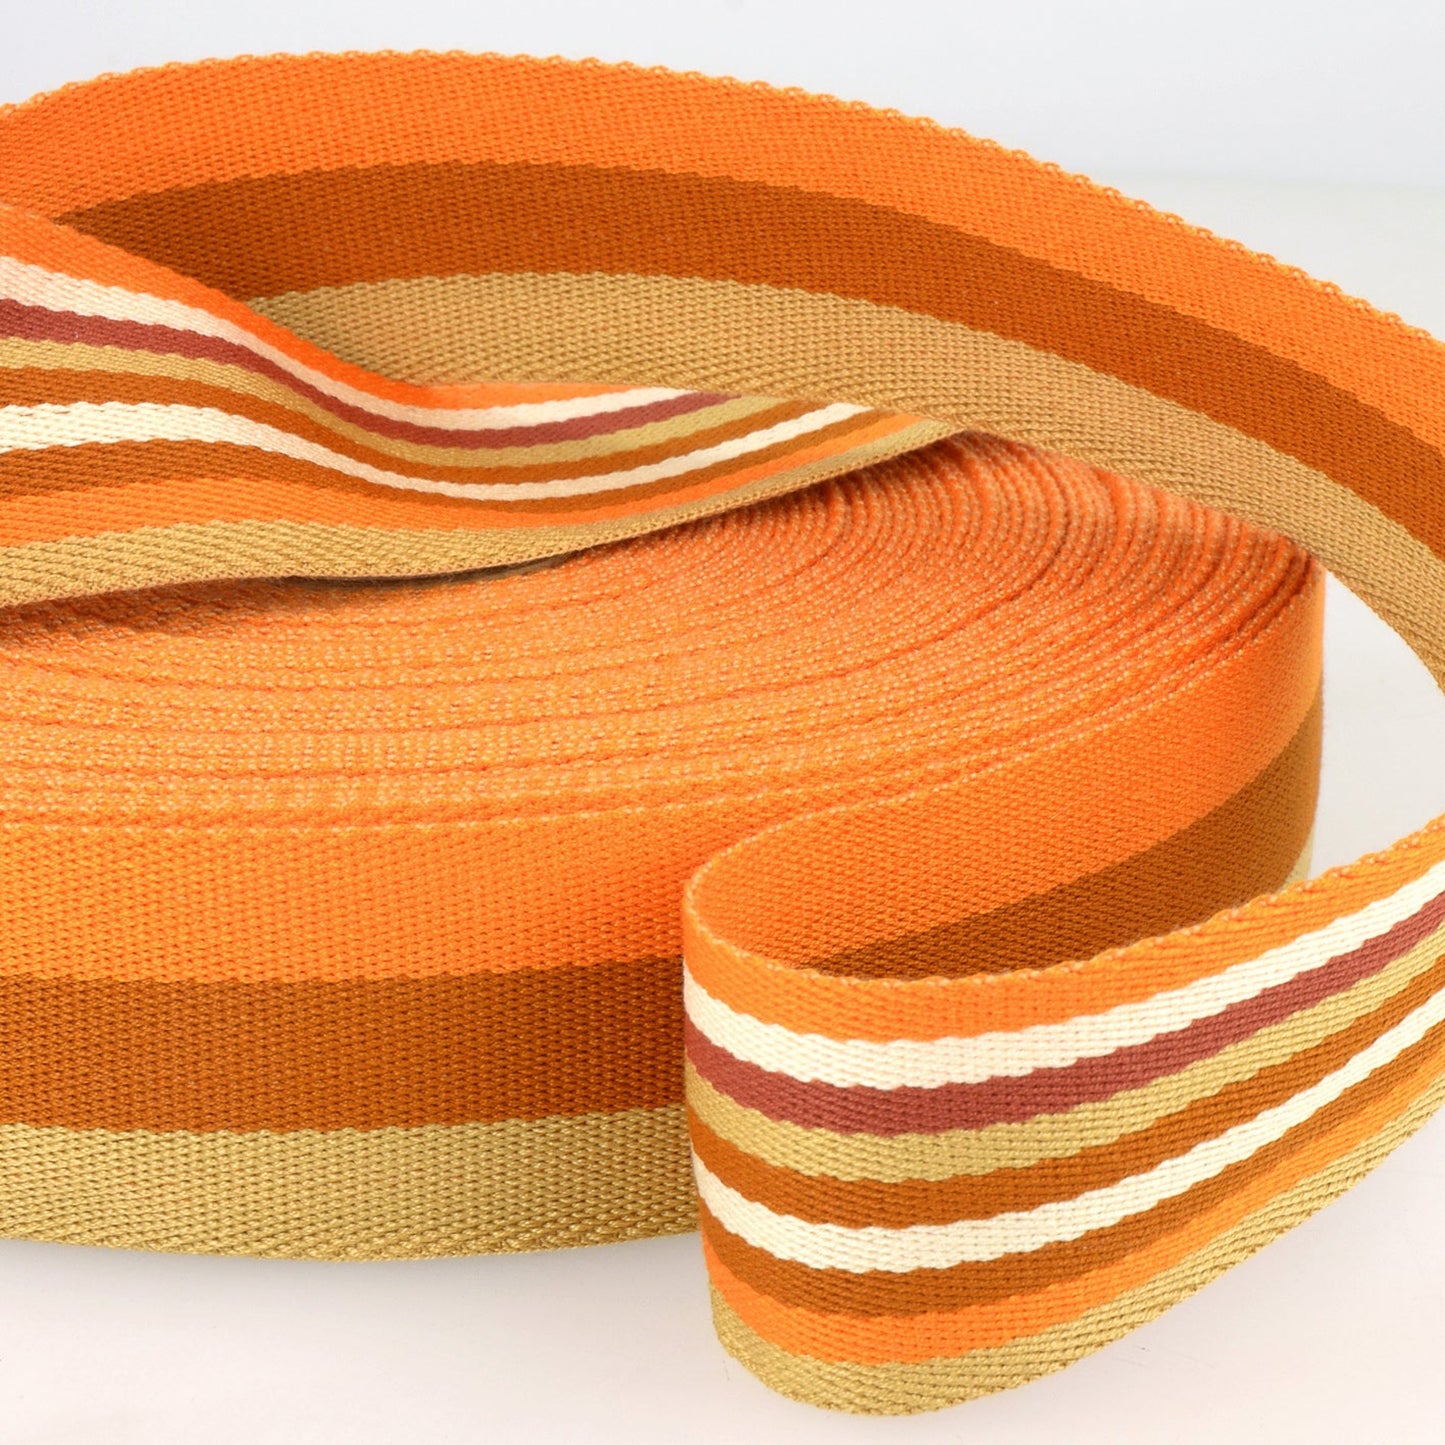 Striped Double Sided Webbing Different Design Each Side 40mm 7 Various Colours